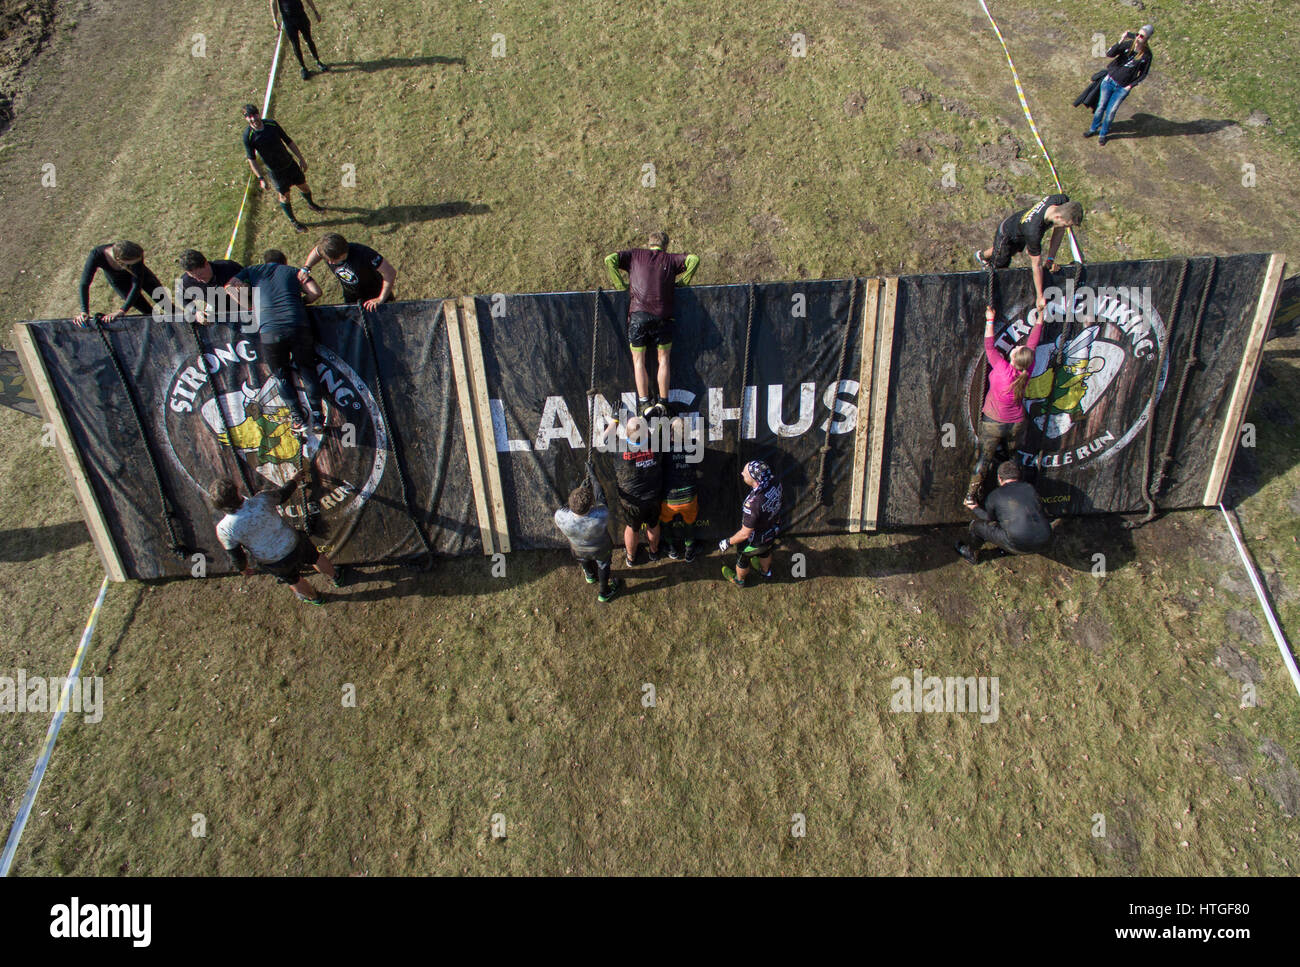 Fuerstenau, Germany. 11th Mar, 2017. Participants in the Strong Viking Run obstacle course race in Fuerstenau, Germany, 11 March 2017. The participants must complete a race over numerous artificial and natural obstacles. Photo: Friso Gentsch/dpa/Alamy Live News Stock Photo